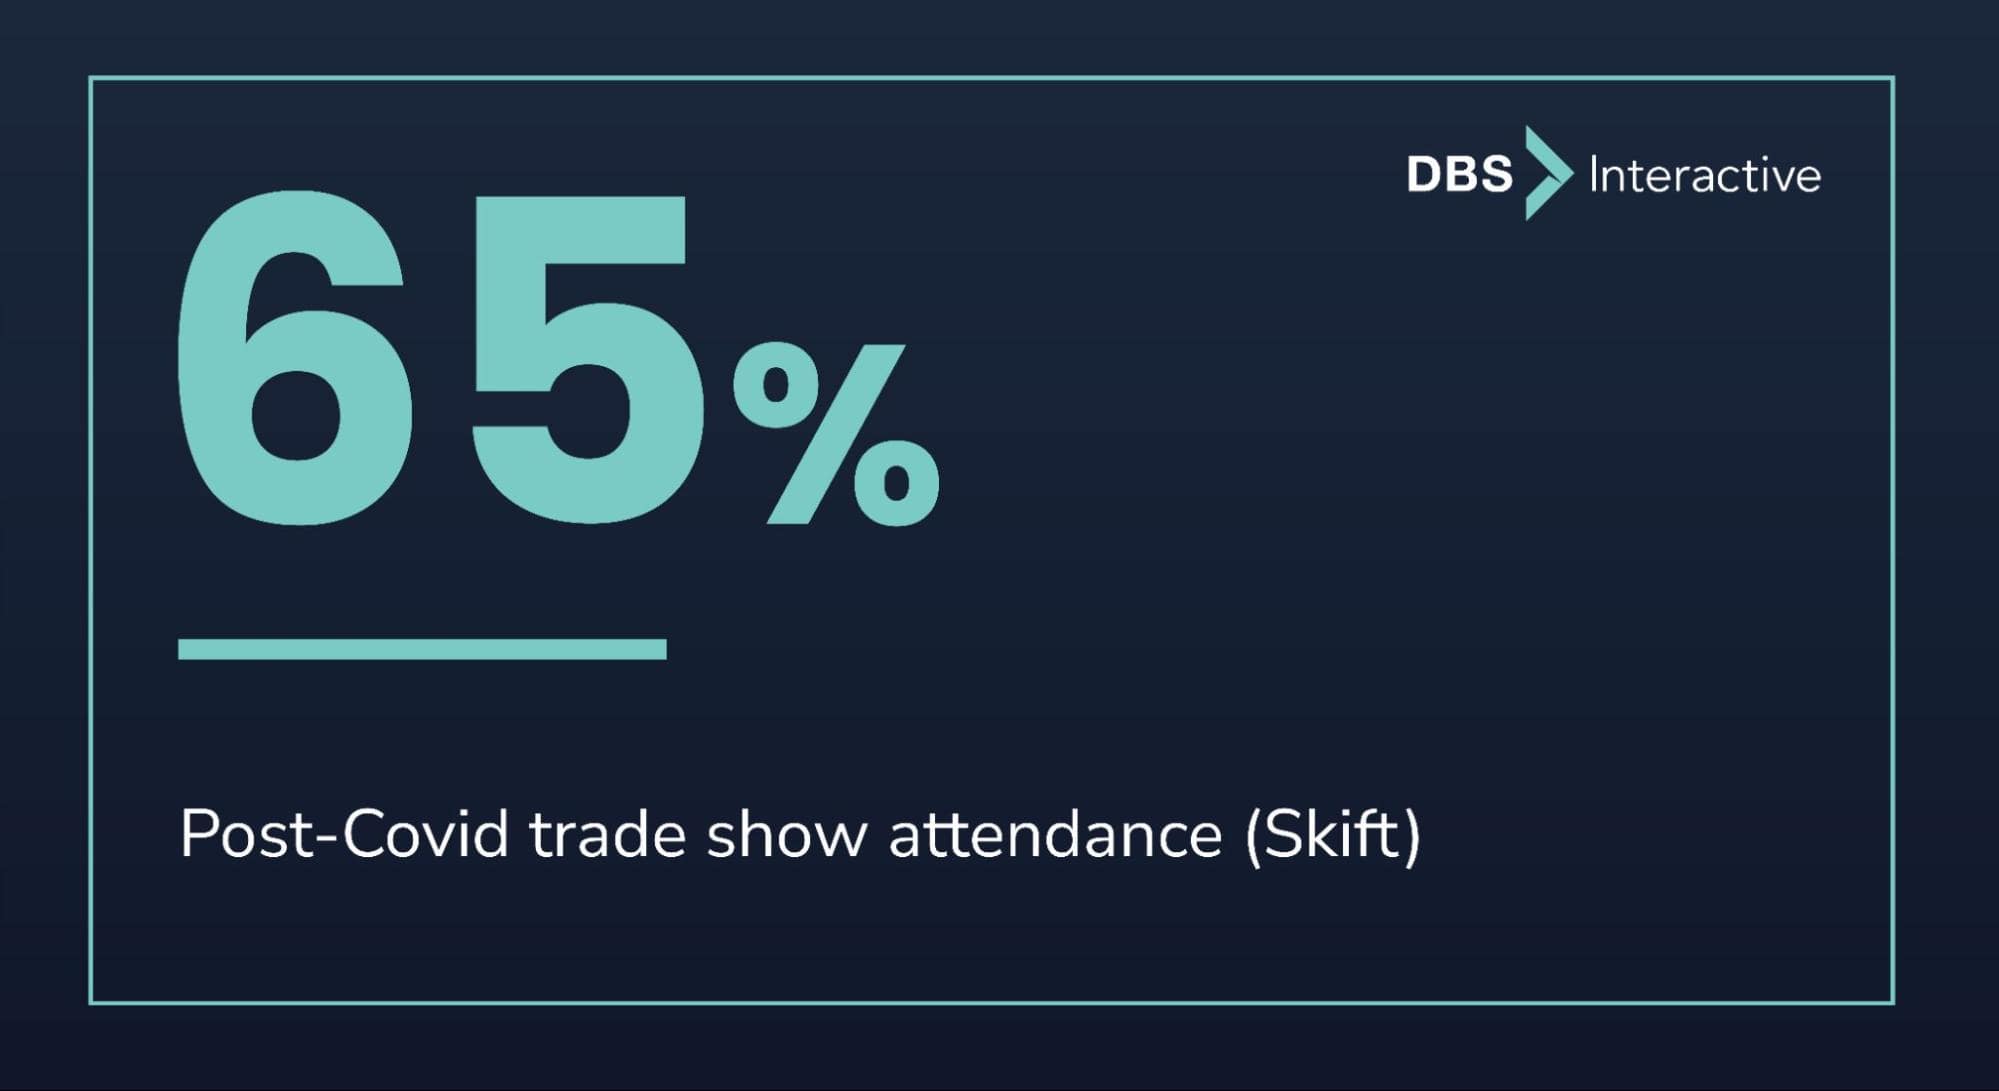 Post Covid trade show attendance is at 65%